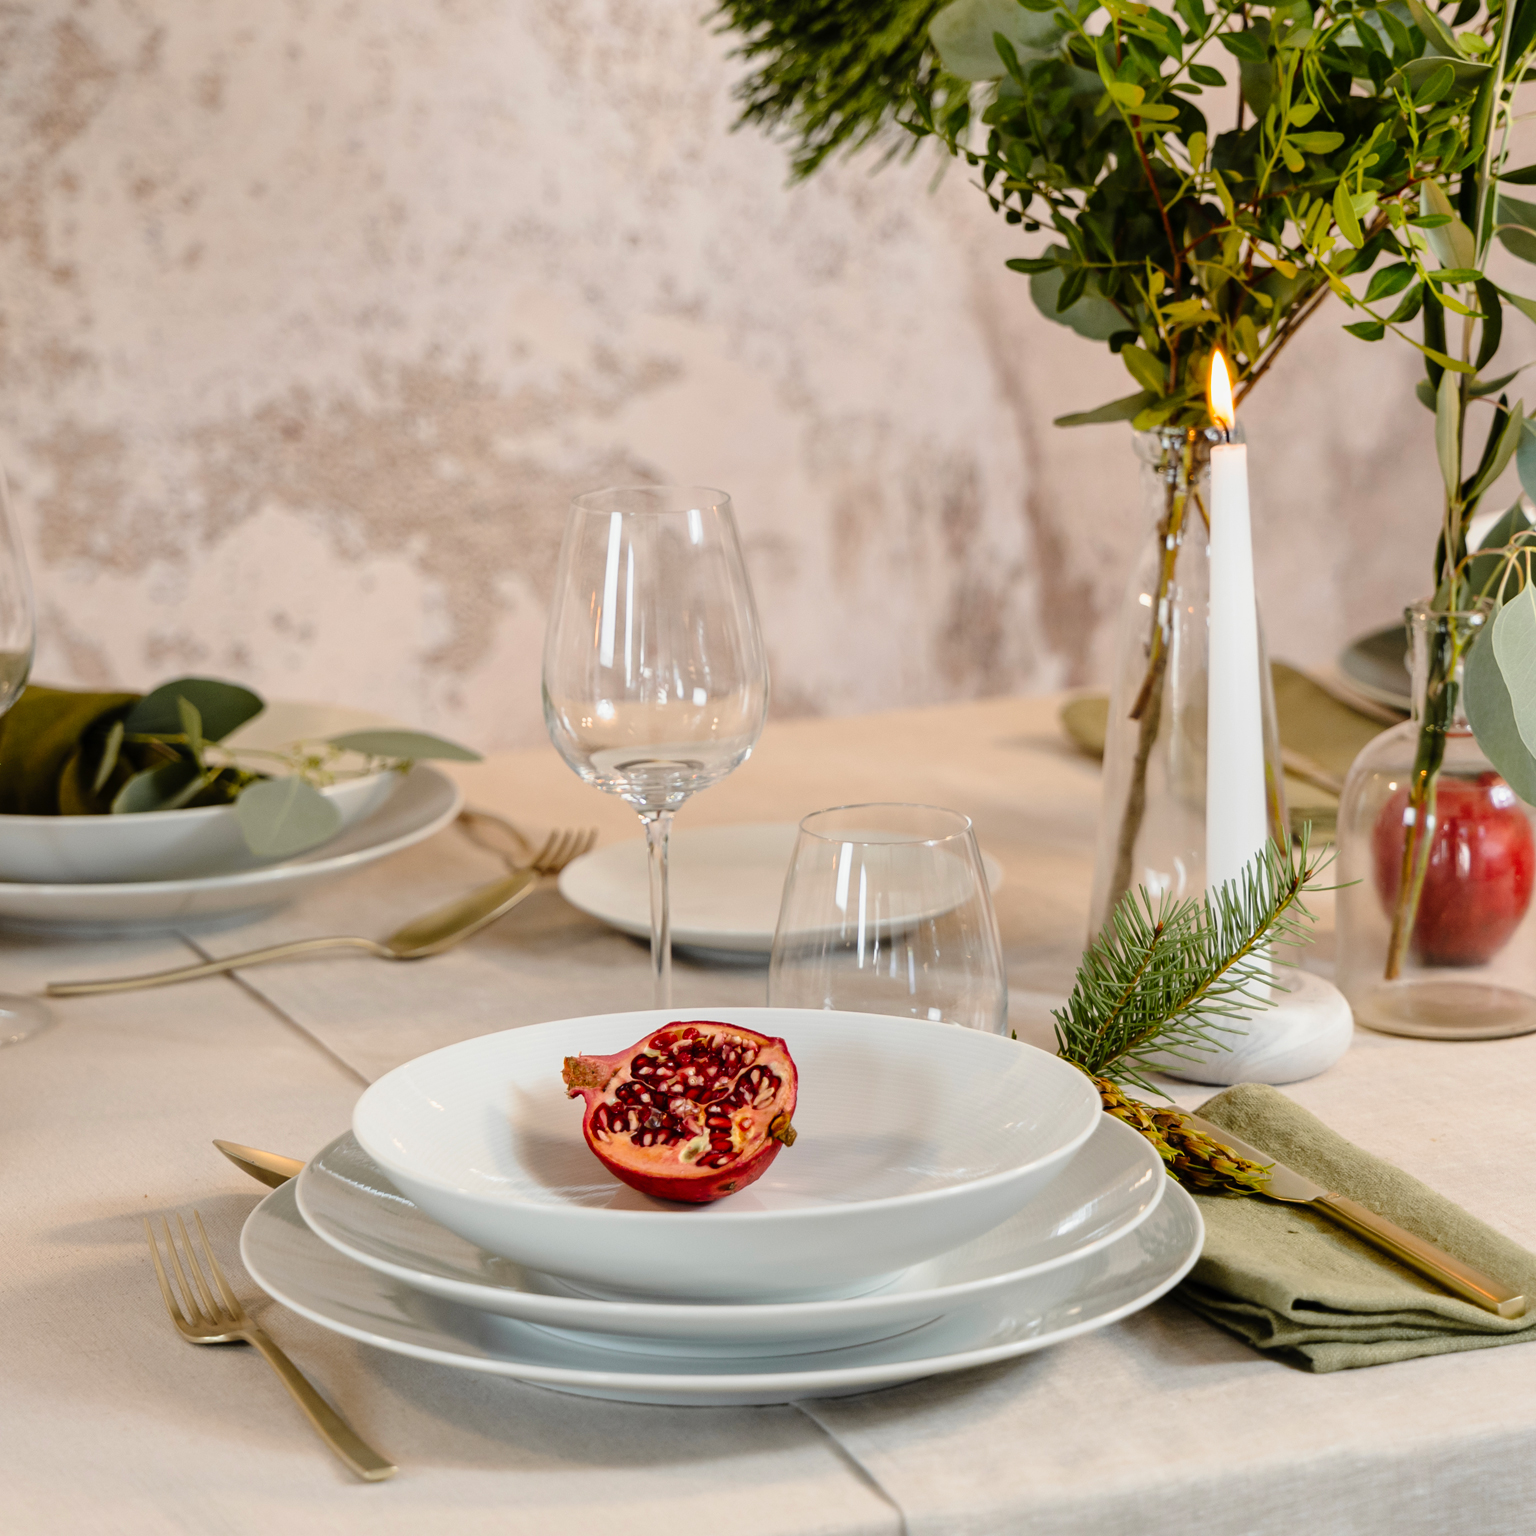 Thomas Loft White soup plate, dinner plate and charger plate stacked on top of each other with half a pomegranate as a decoration and wine glass, candle and bouquet of green branches in the background